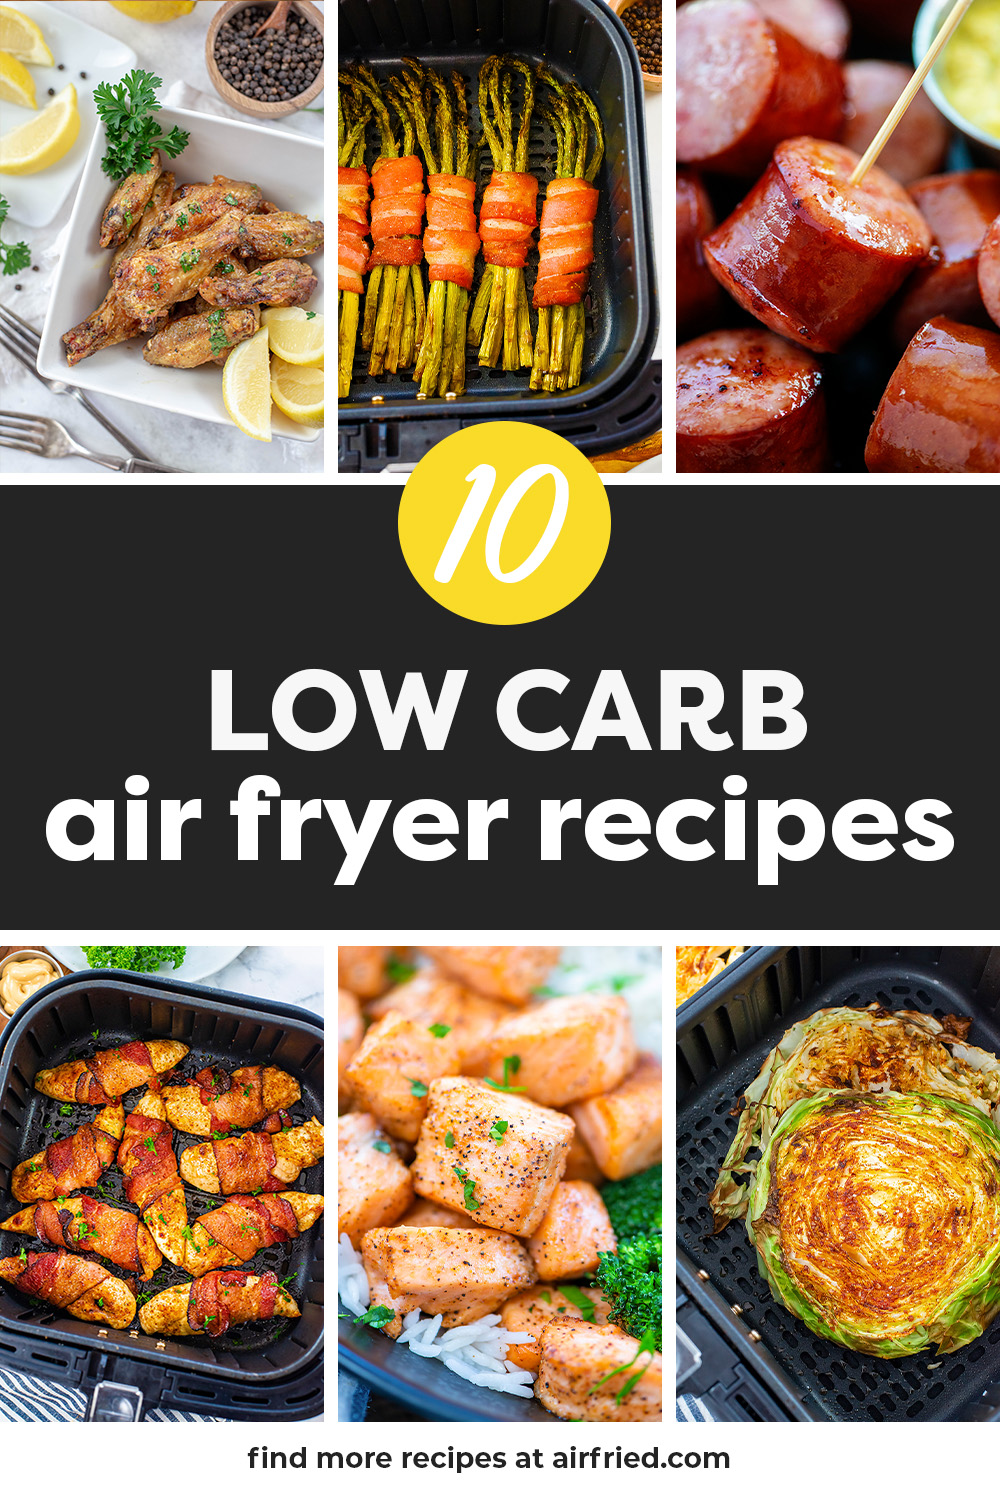 Collage of low carb air fryer recipes.